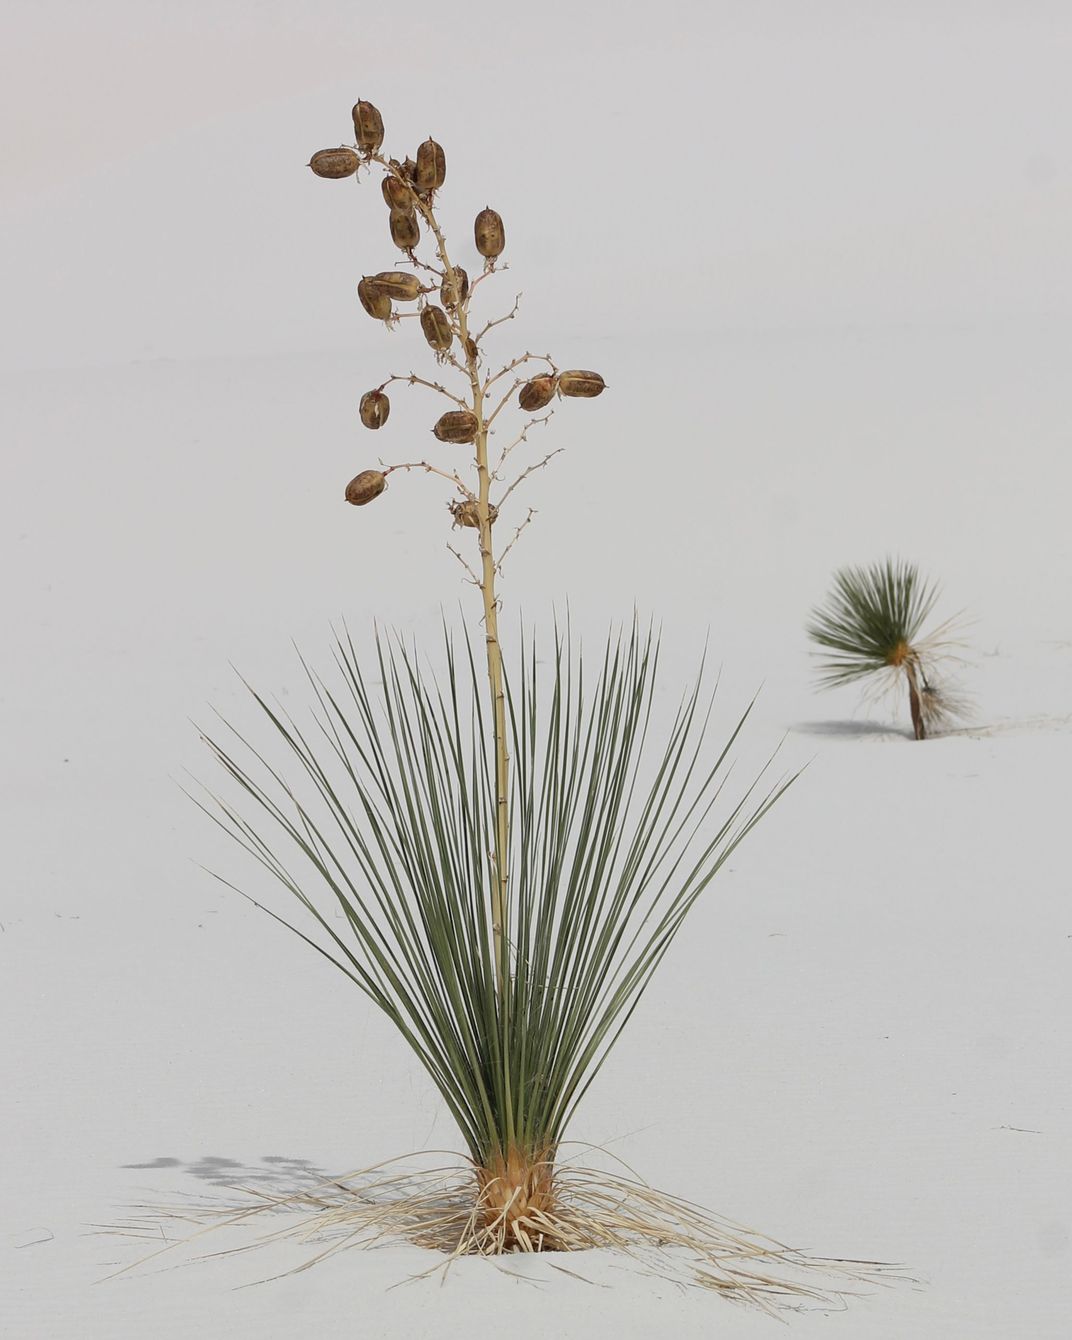 grassy plant and a sprig with pods